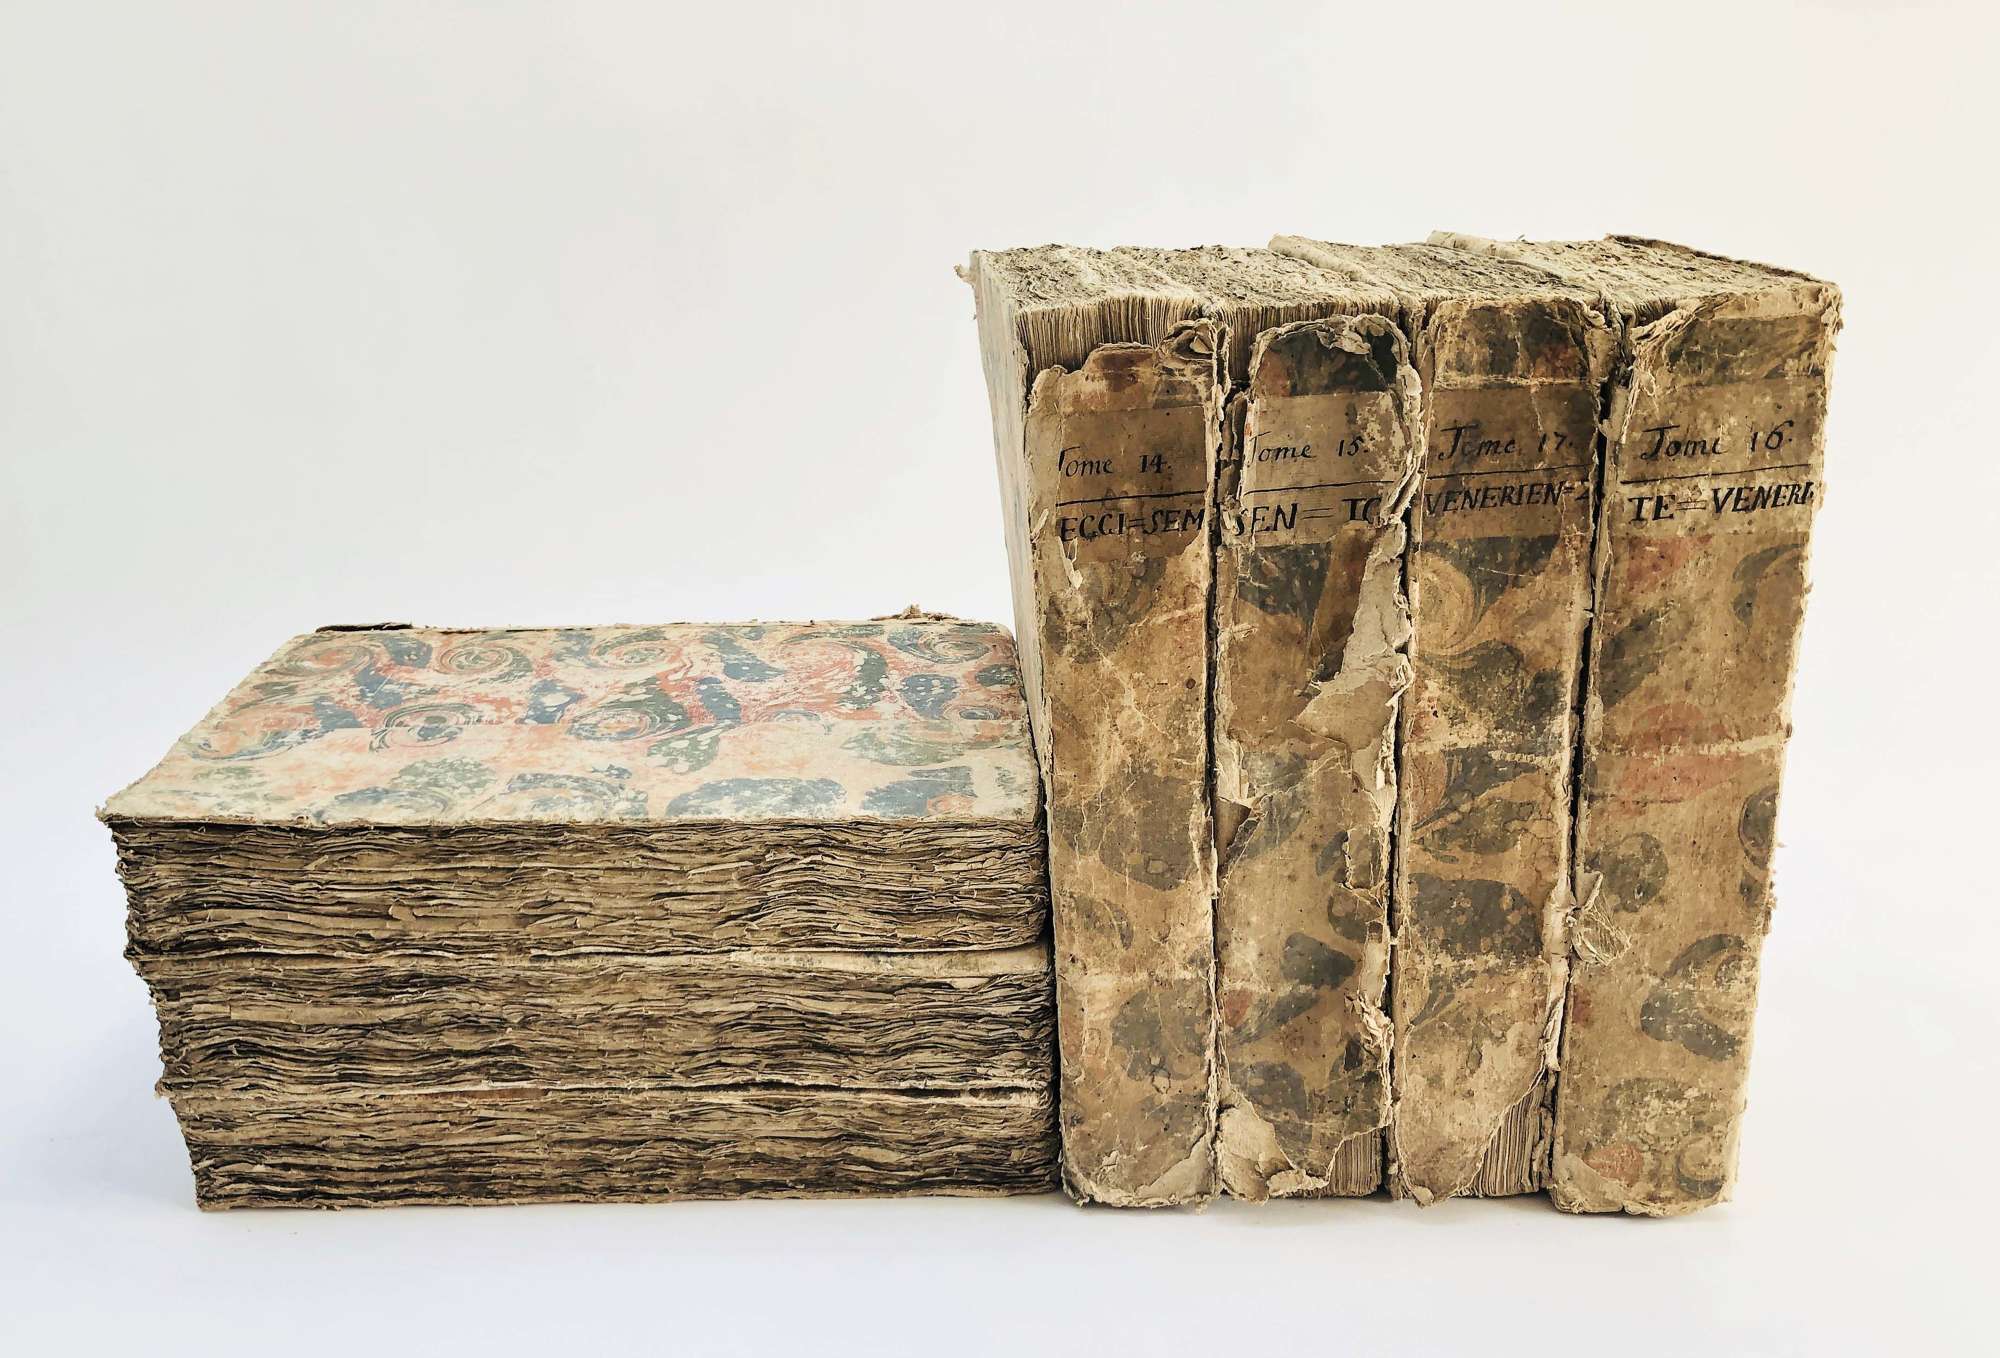 A rare and huge set of 7 French 18th c Books - printed 1765